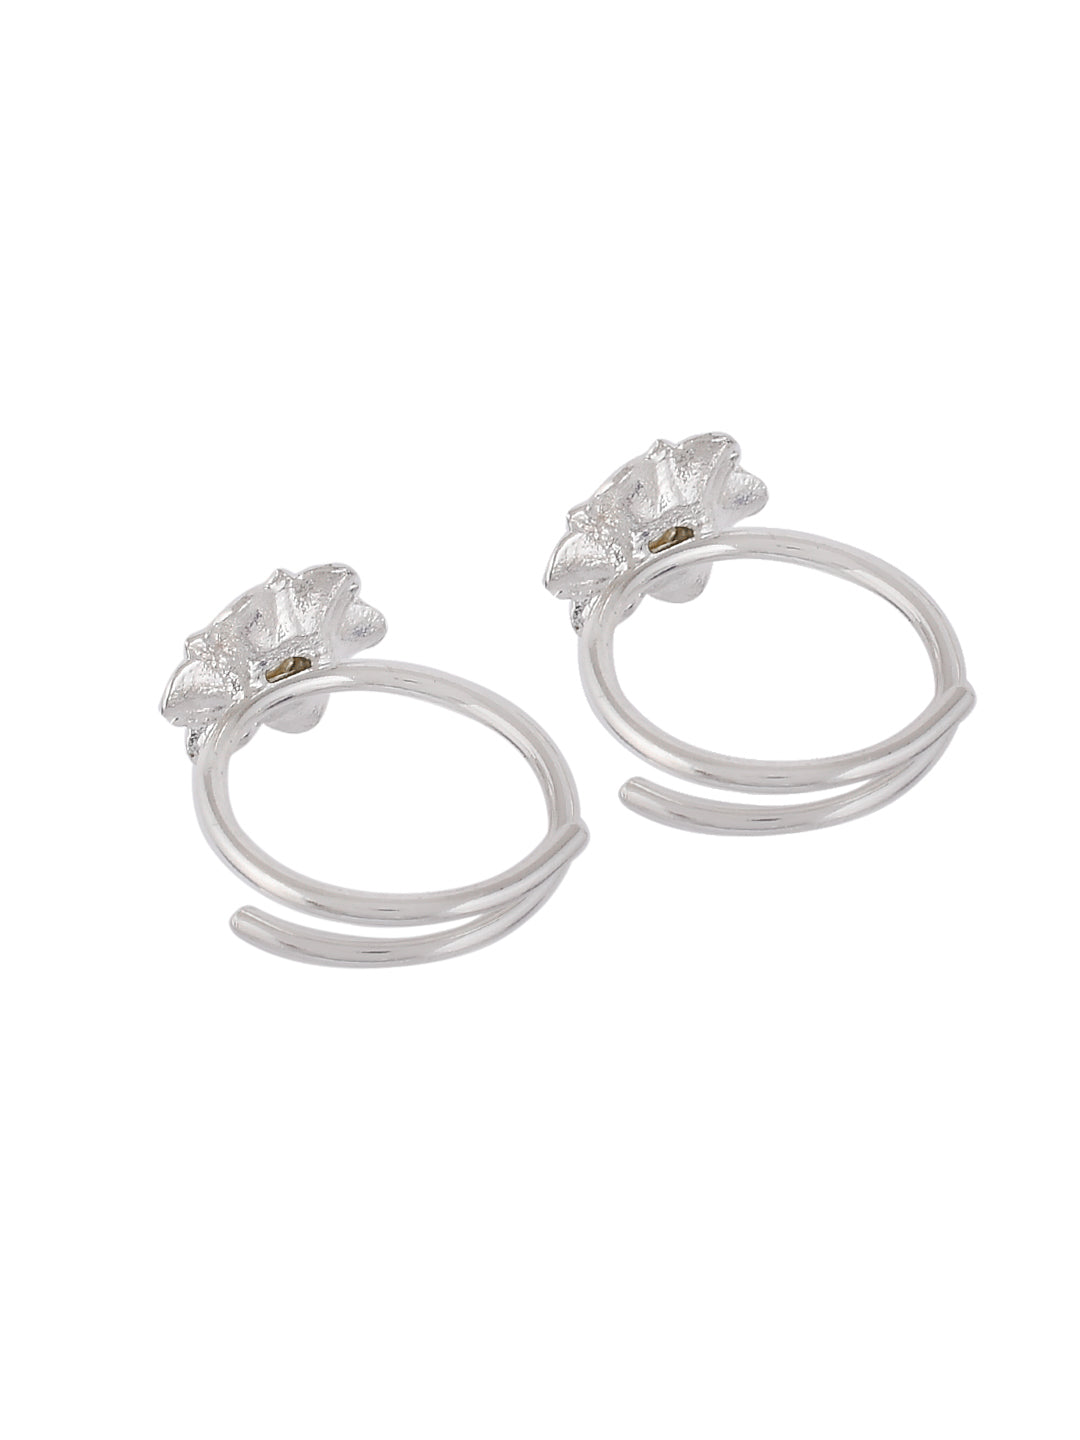 Floral Toe Ring With Crystal For Women